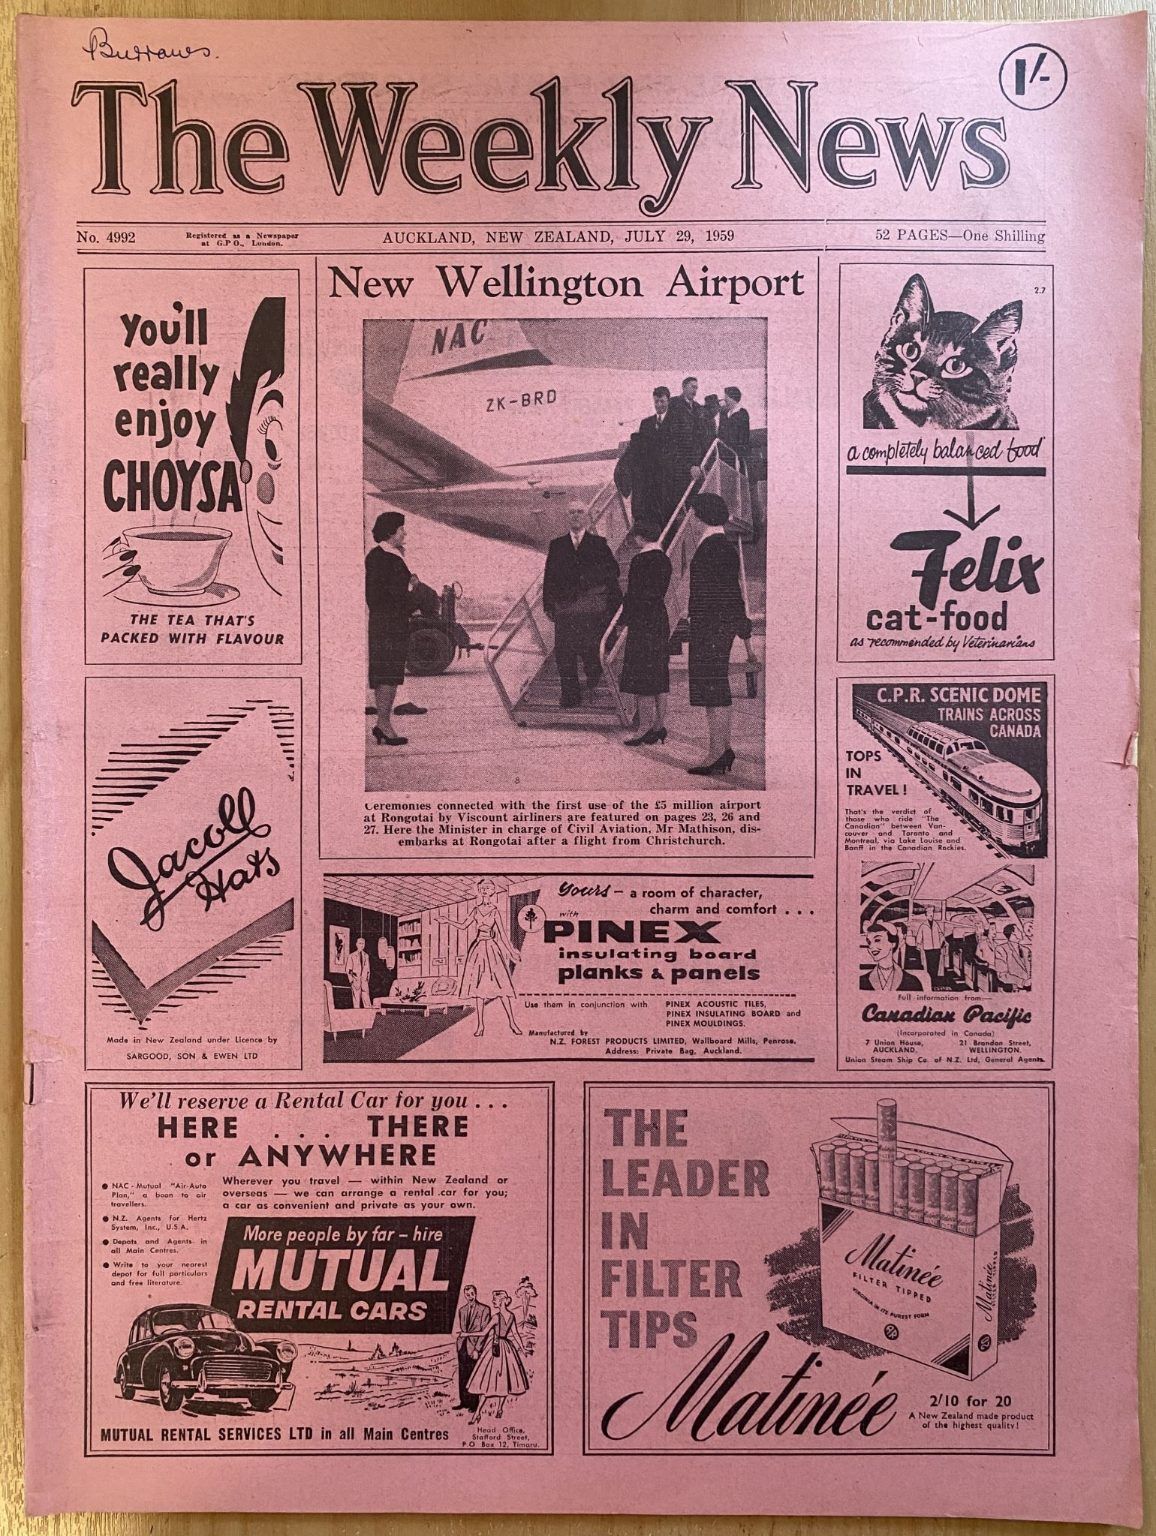 OLD NEWSPAPER: The Weekly News - No. 4992, 29 July 1959